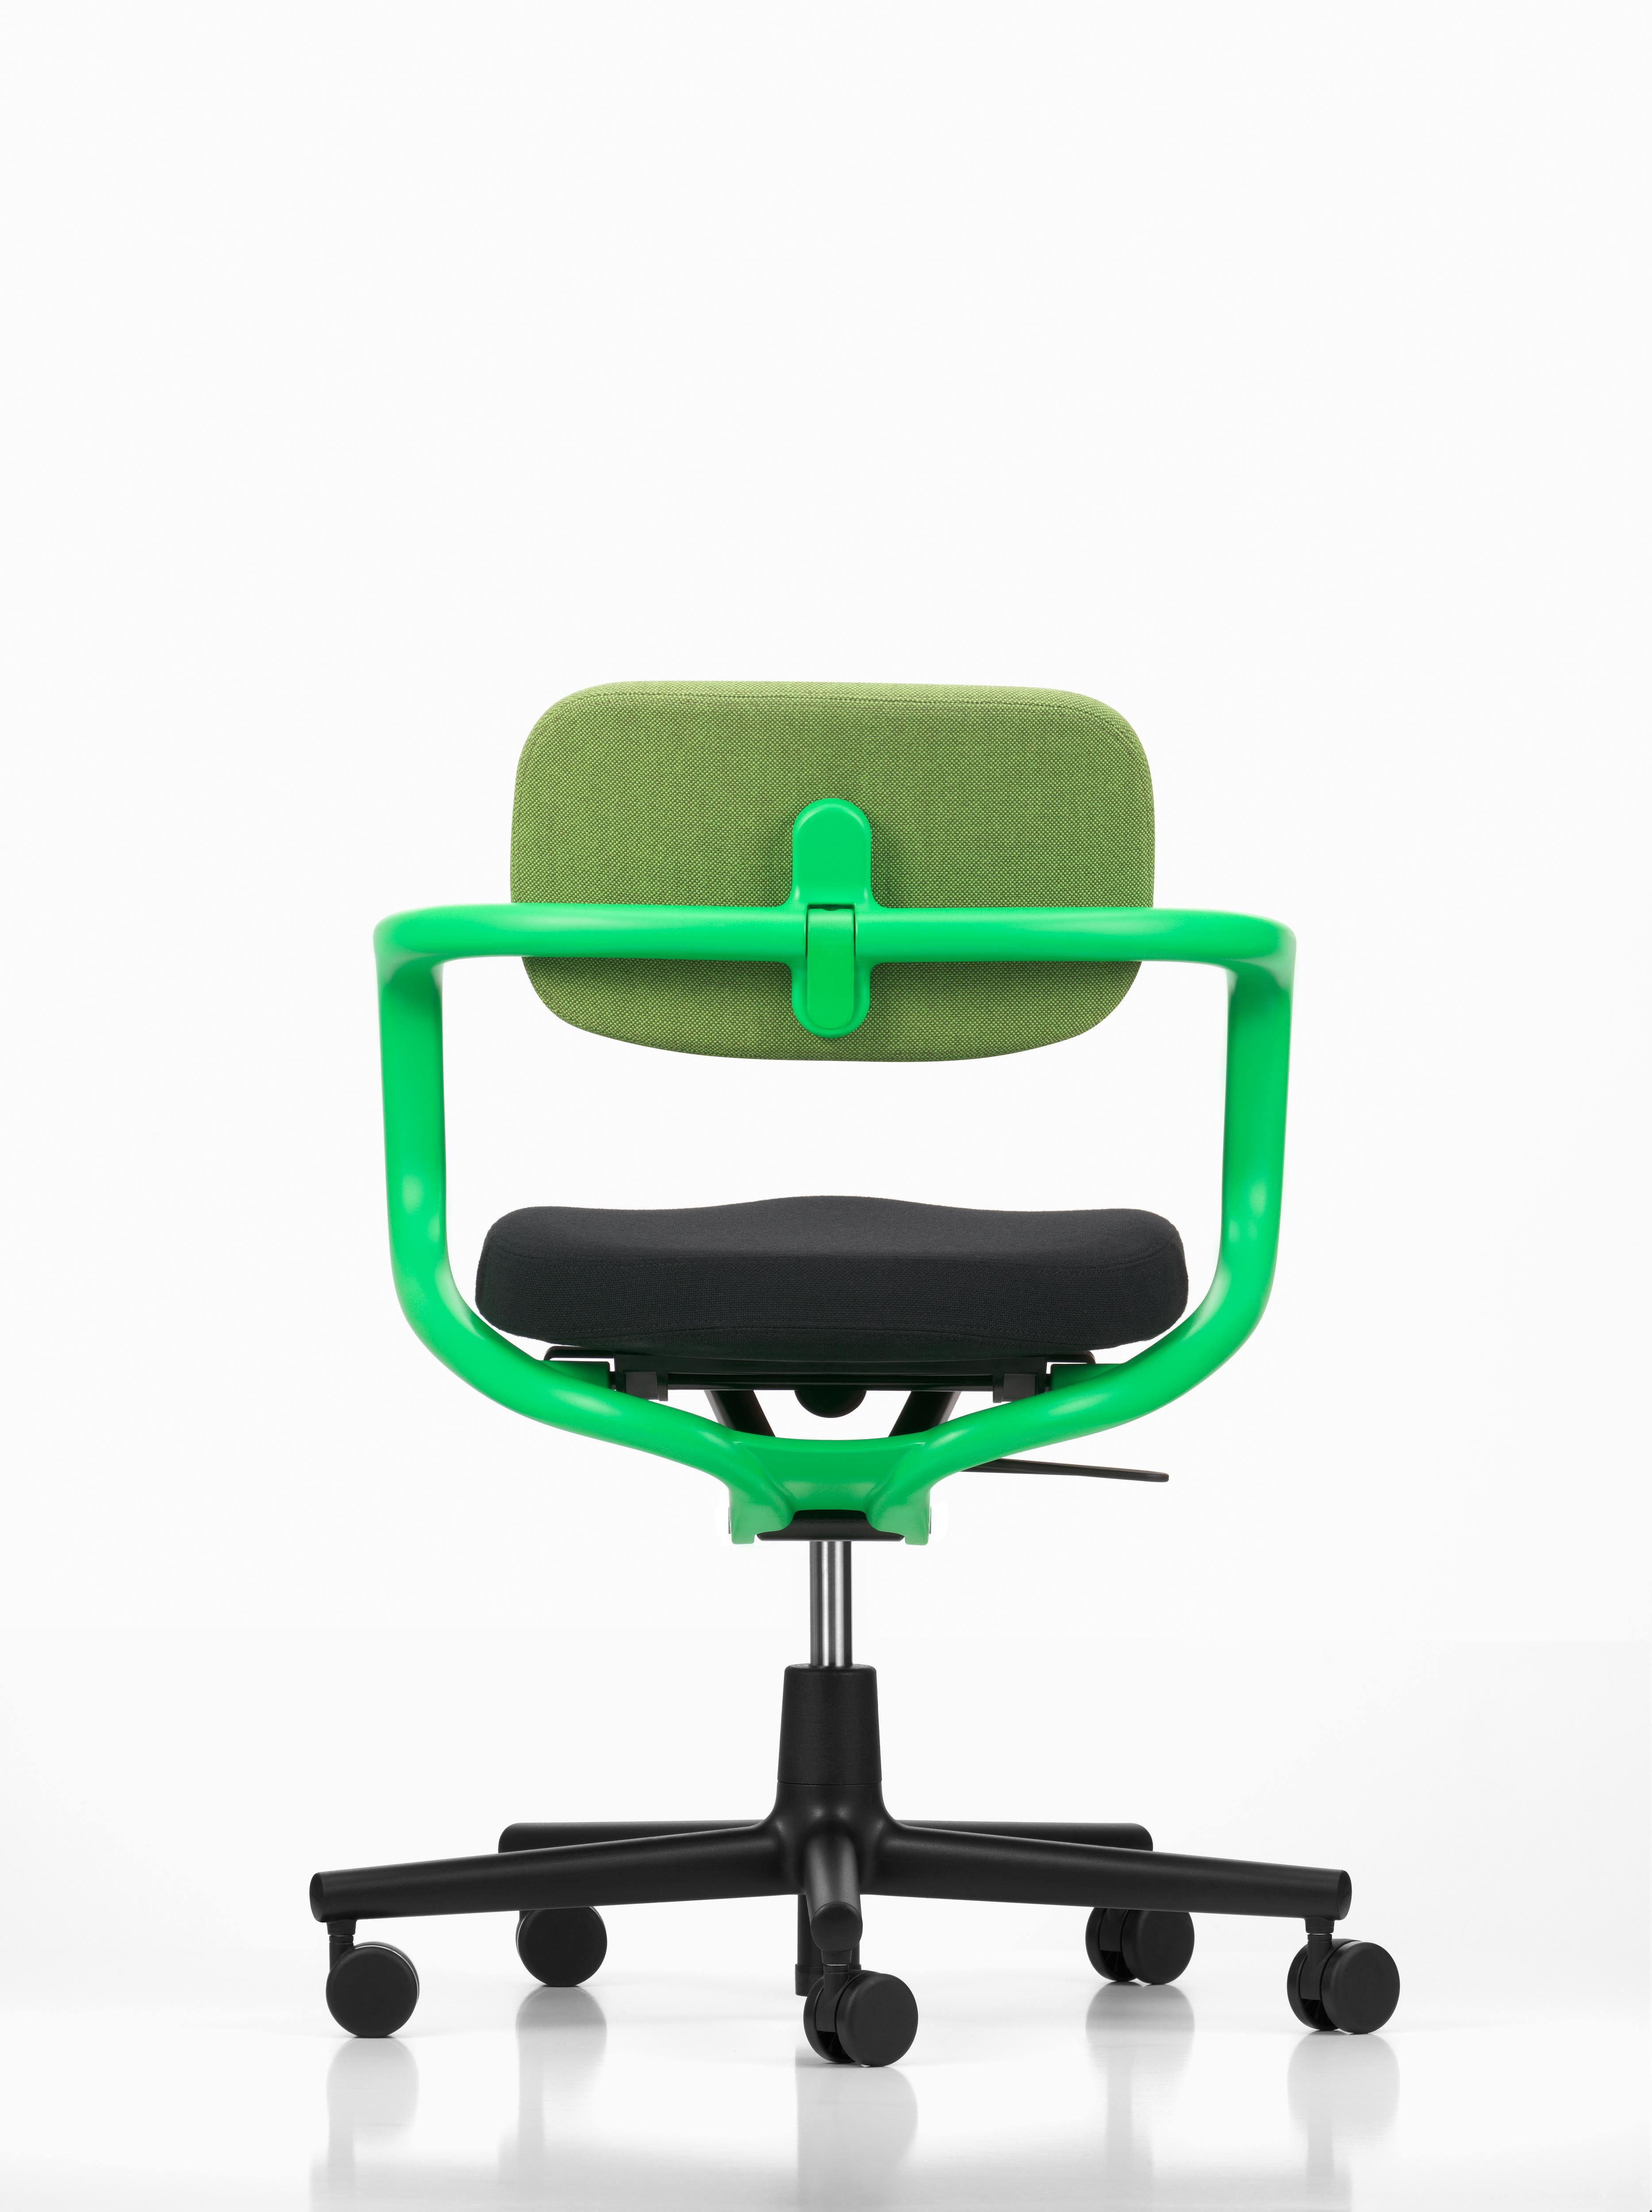 Swiss Vitra Allstar Chair in Grass & Green Forest and Nero Hopsak by Konstantin Grcic For Sale